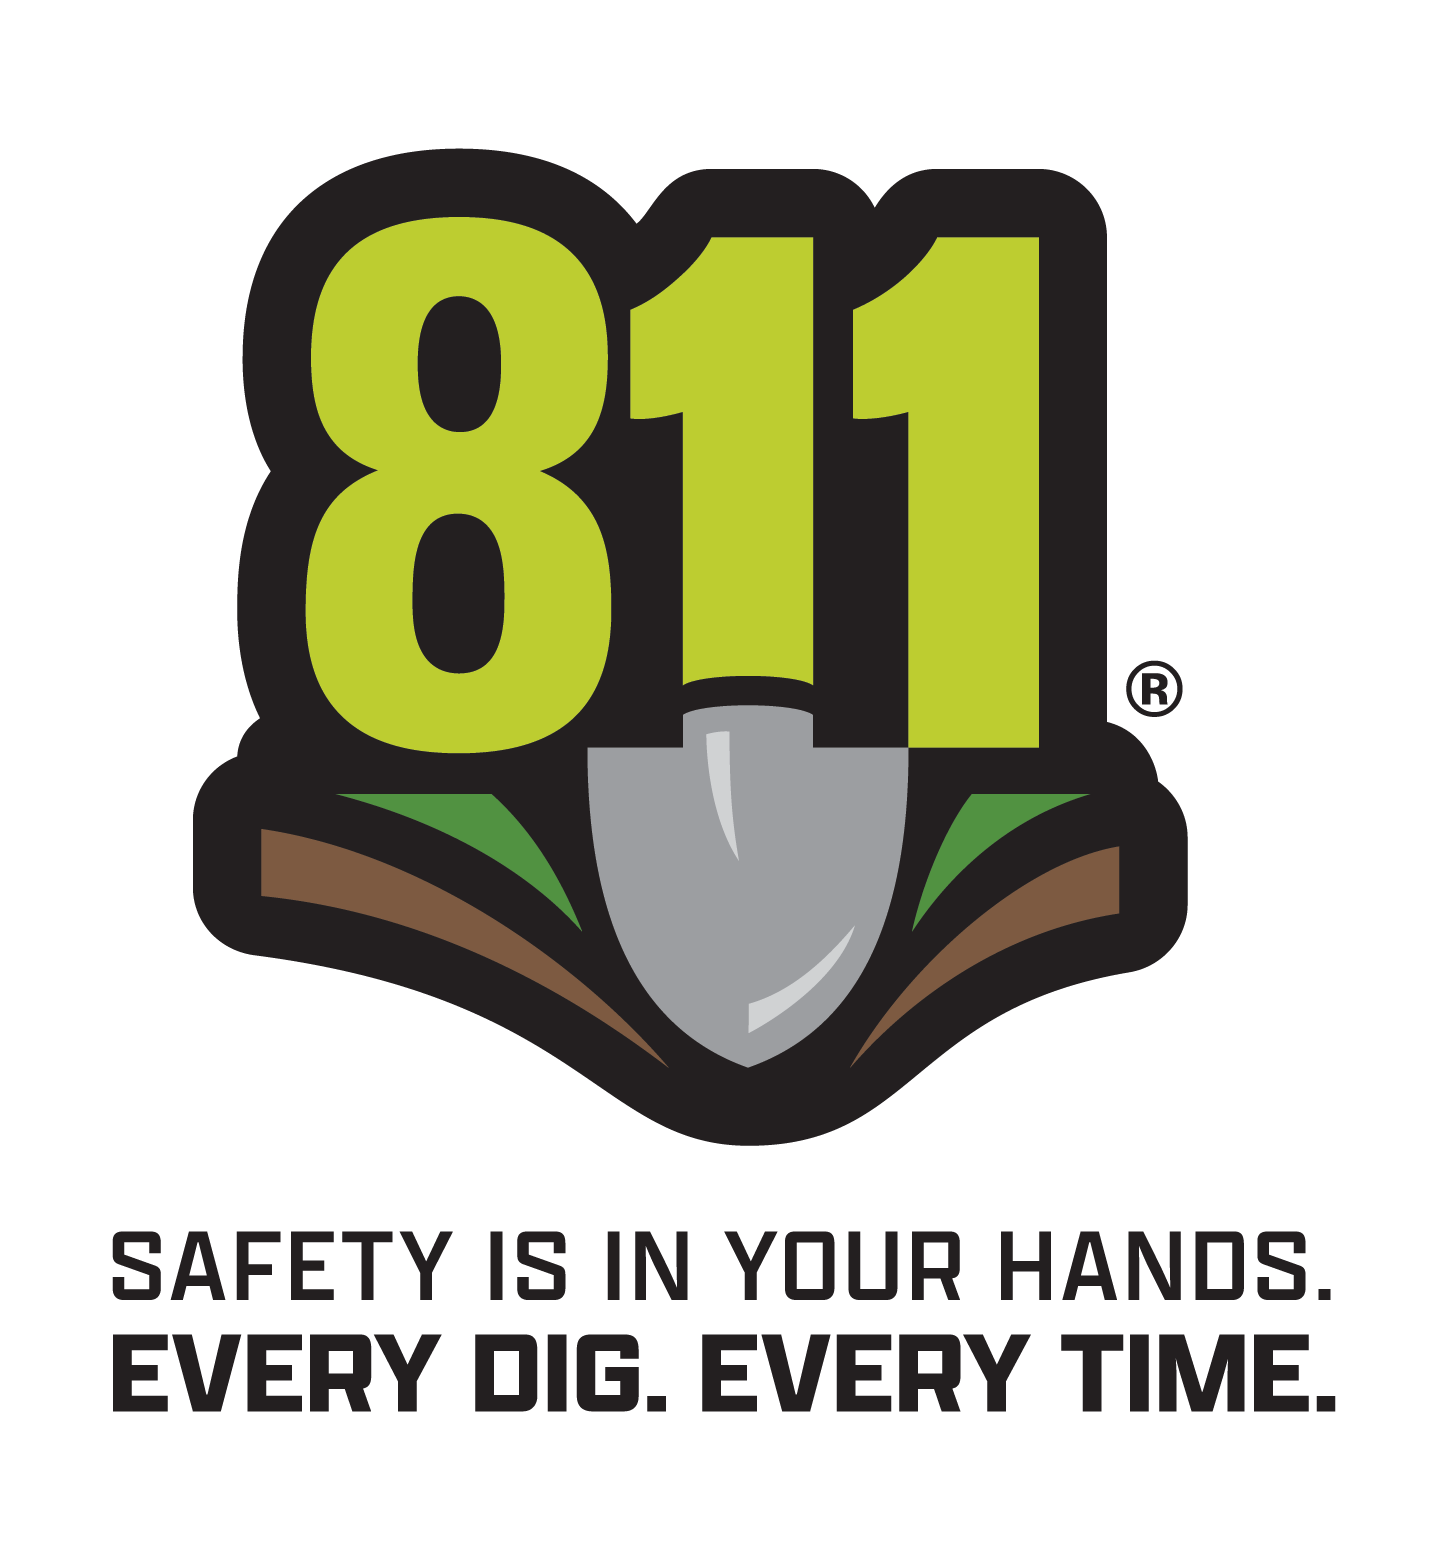 811 Safety is in your hands Every dig Every time logo